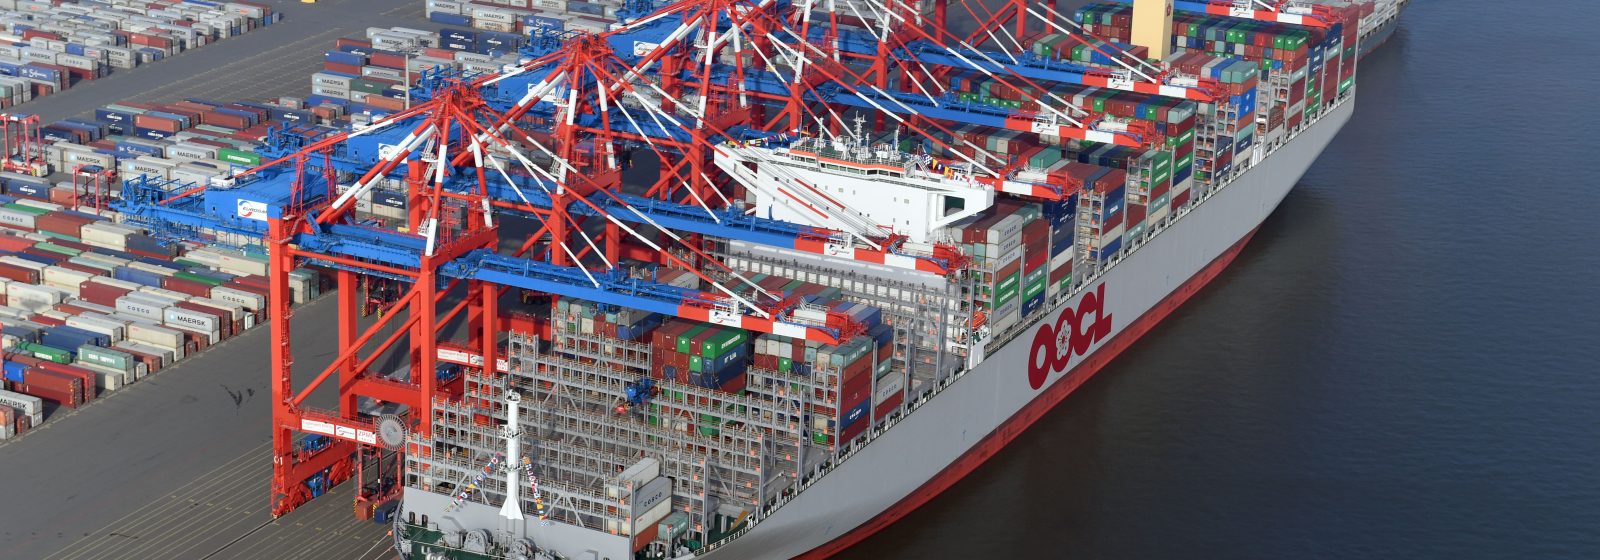 'OOCL Germany'